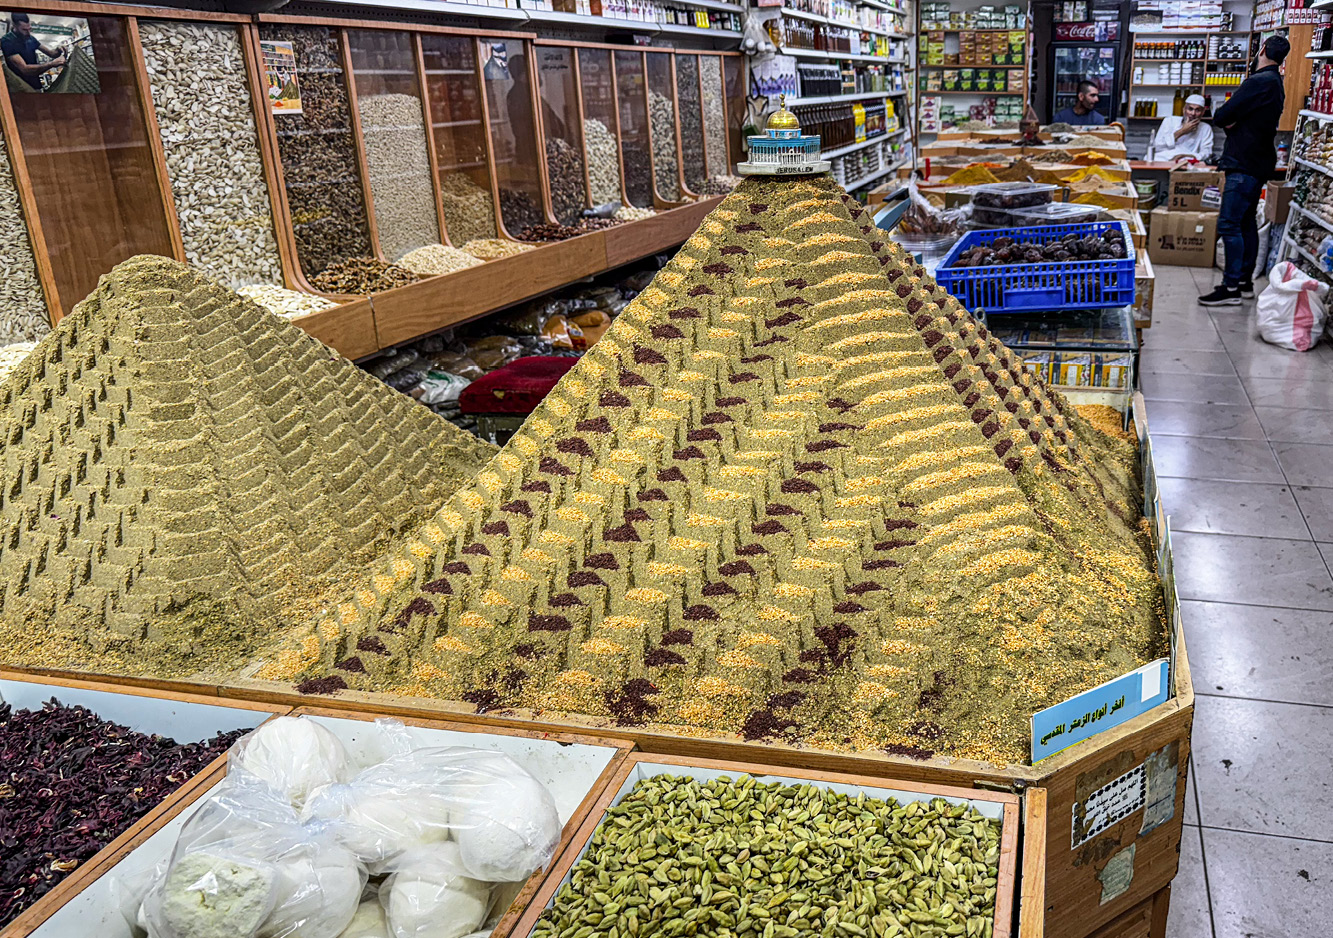 Pyramids of za’atar (thyme, oregano, marjoram sesame, sumac, cumin or coriander are typical ingredients) and other colorful spices greet the buyer at this store in the Muslim Quarter.